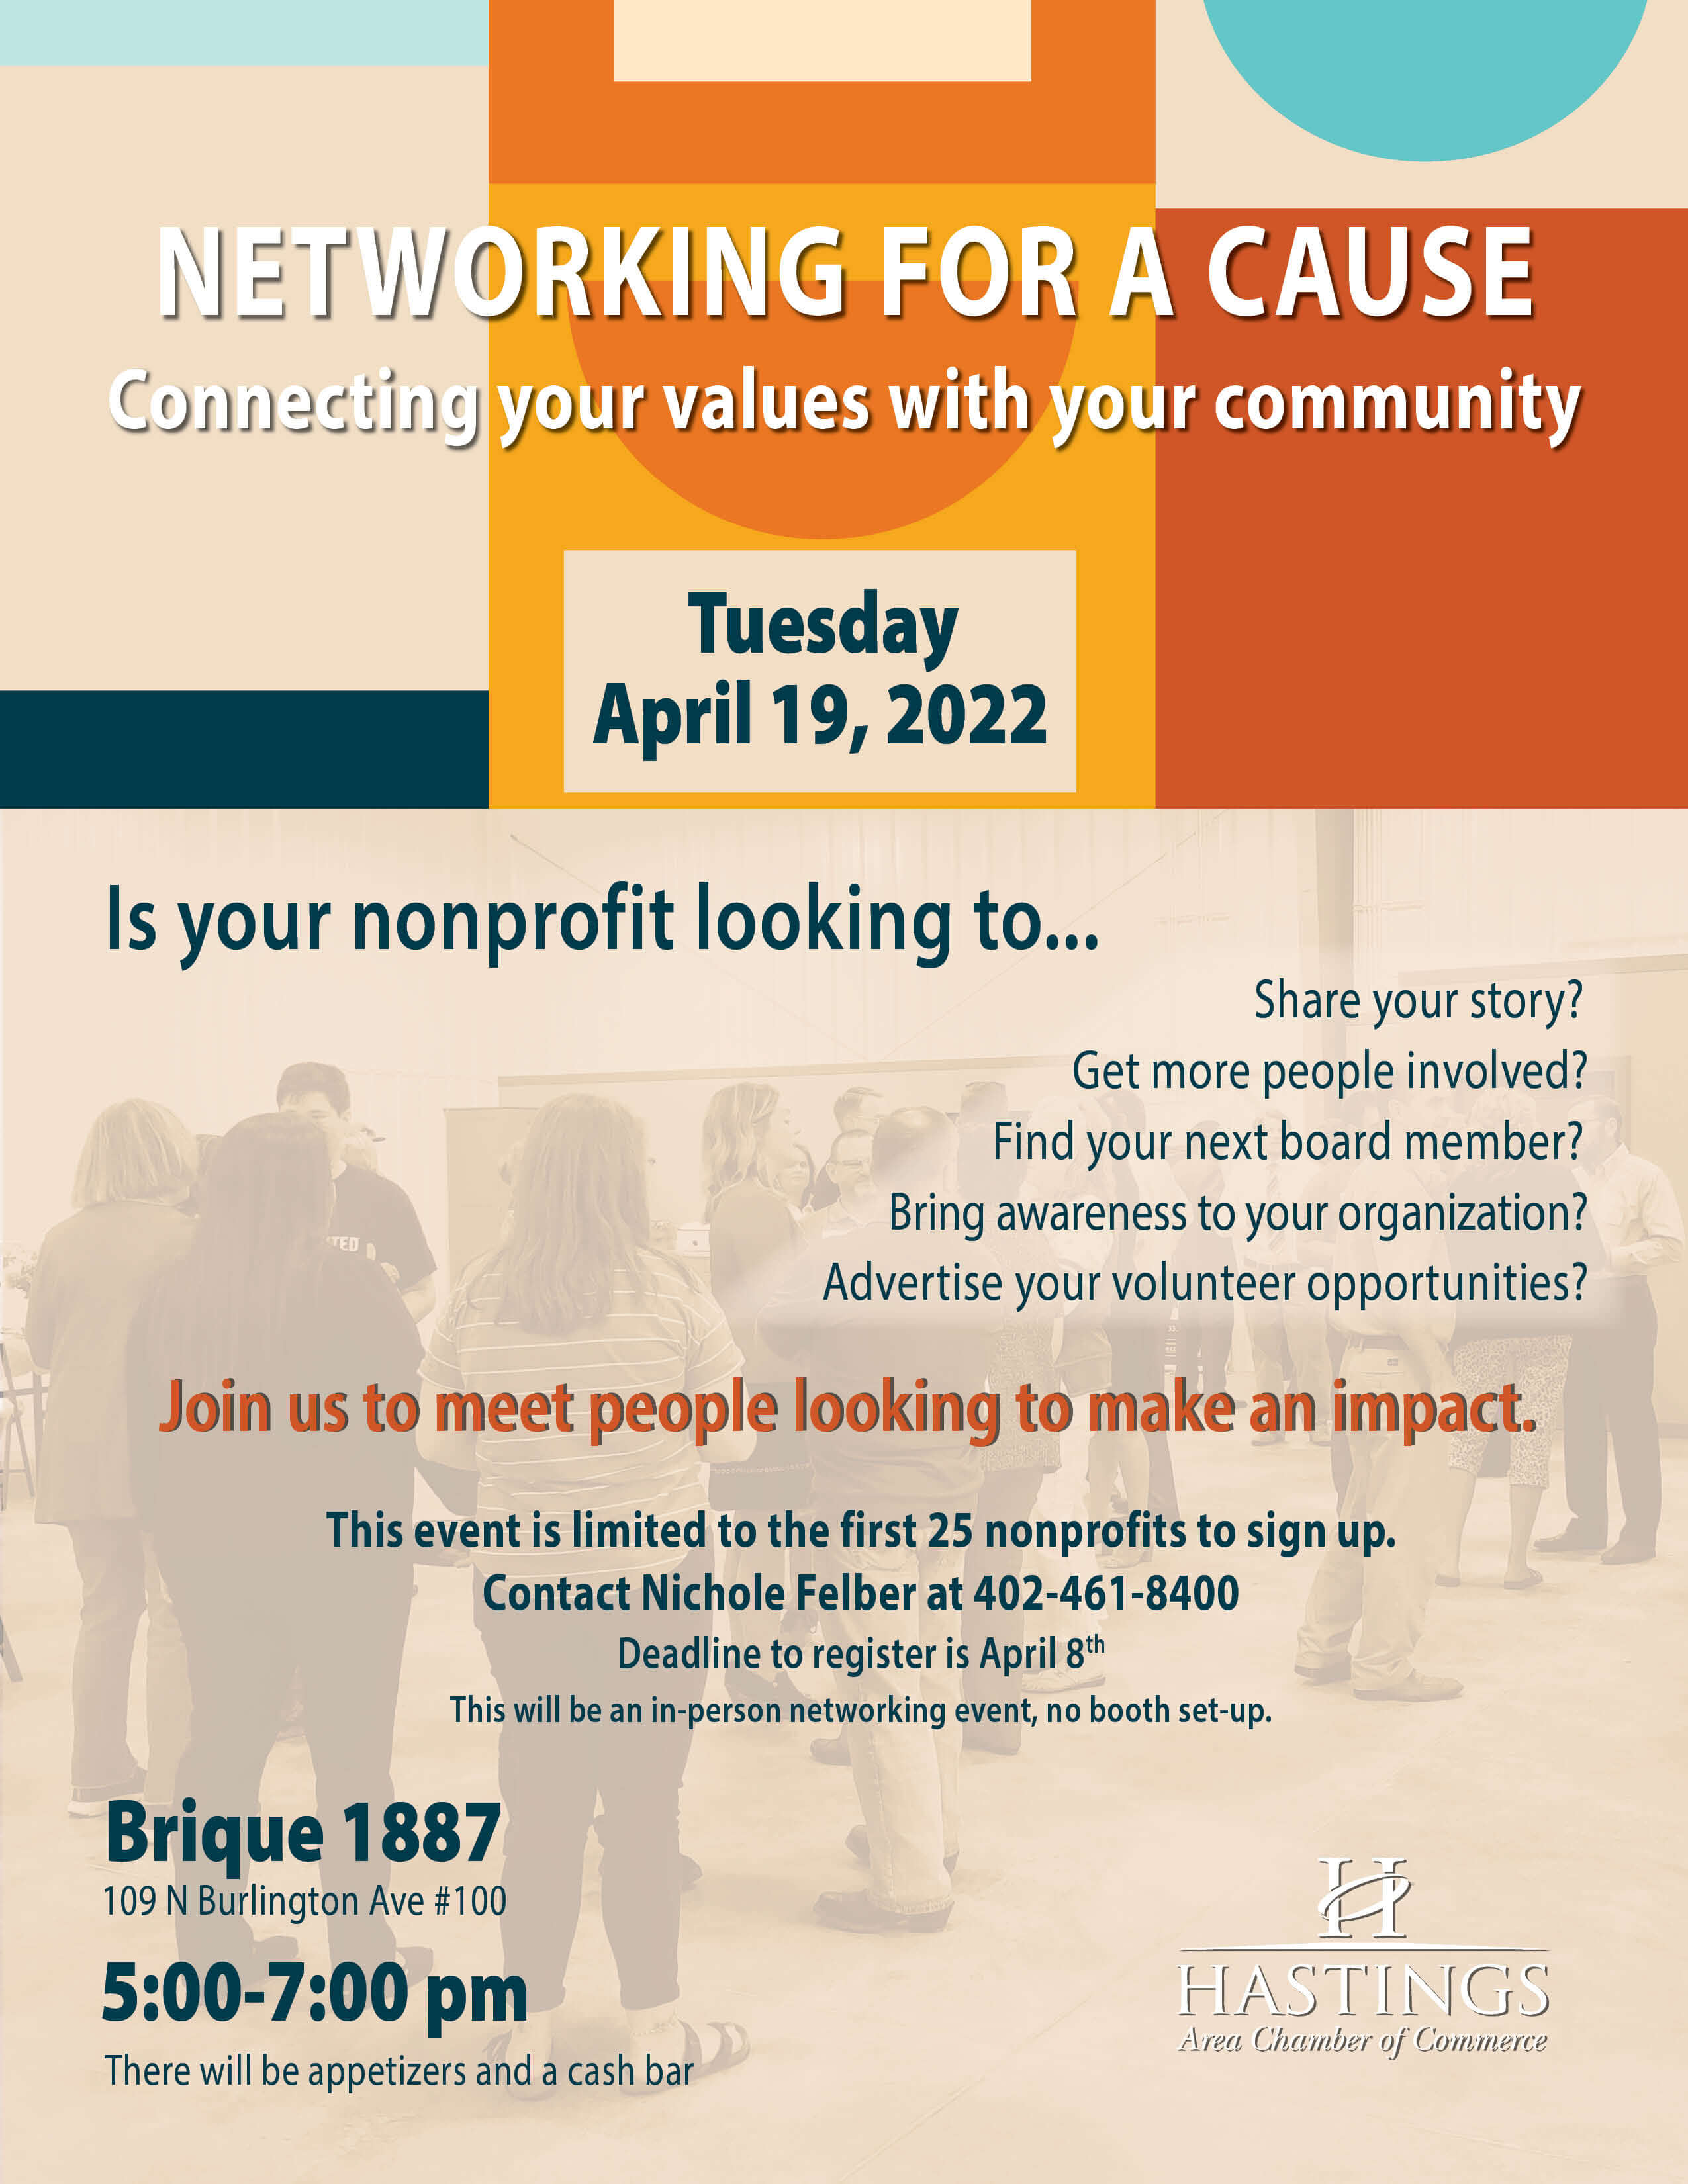 Networking for a cause